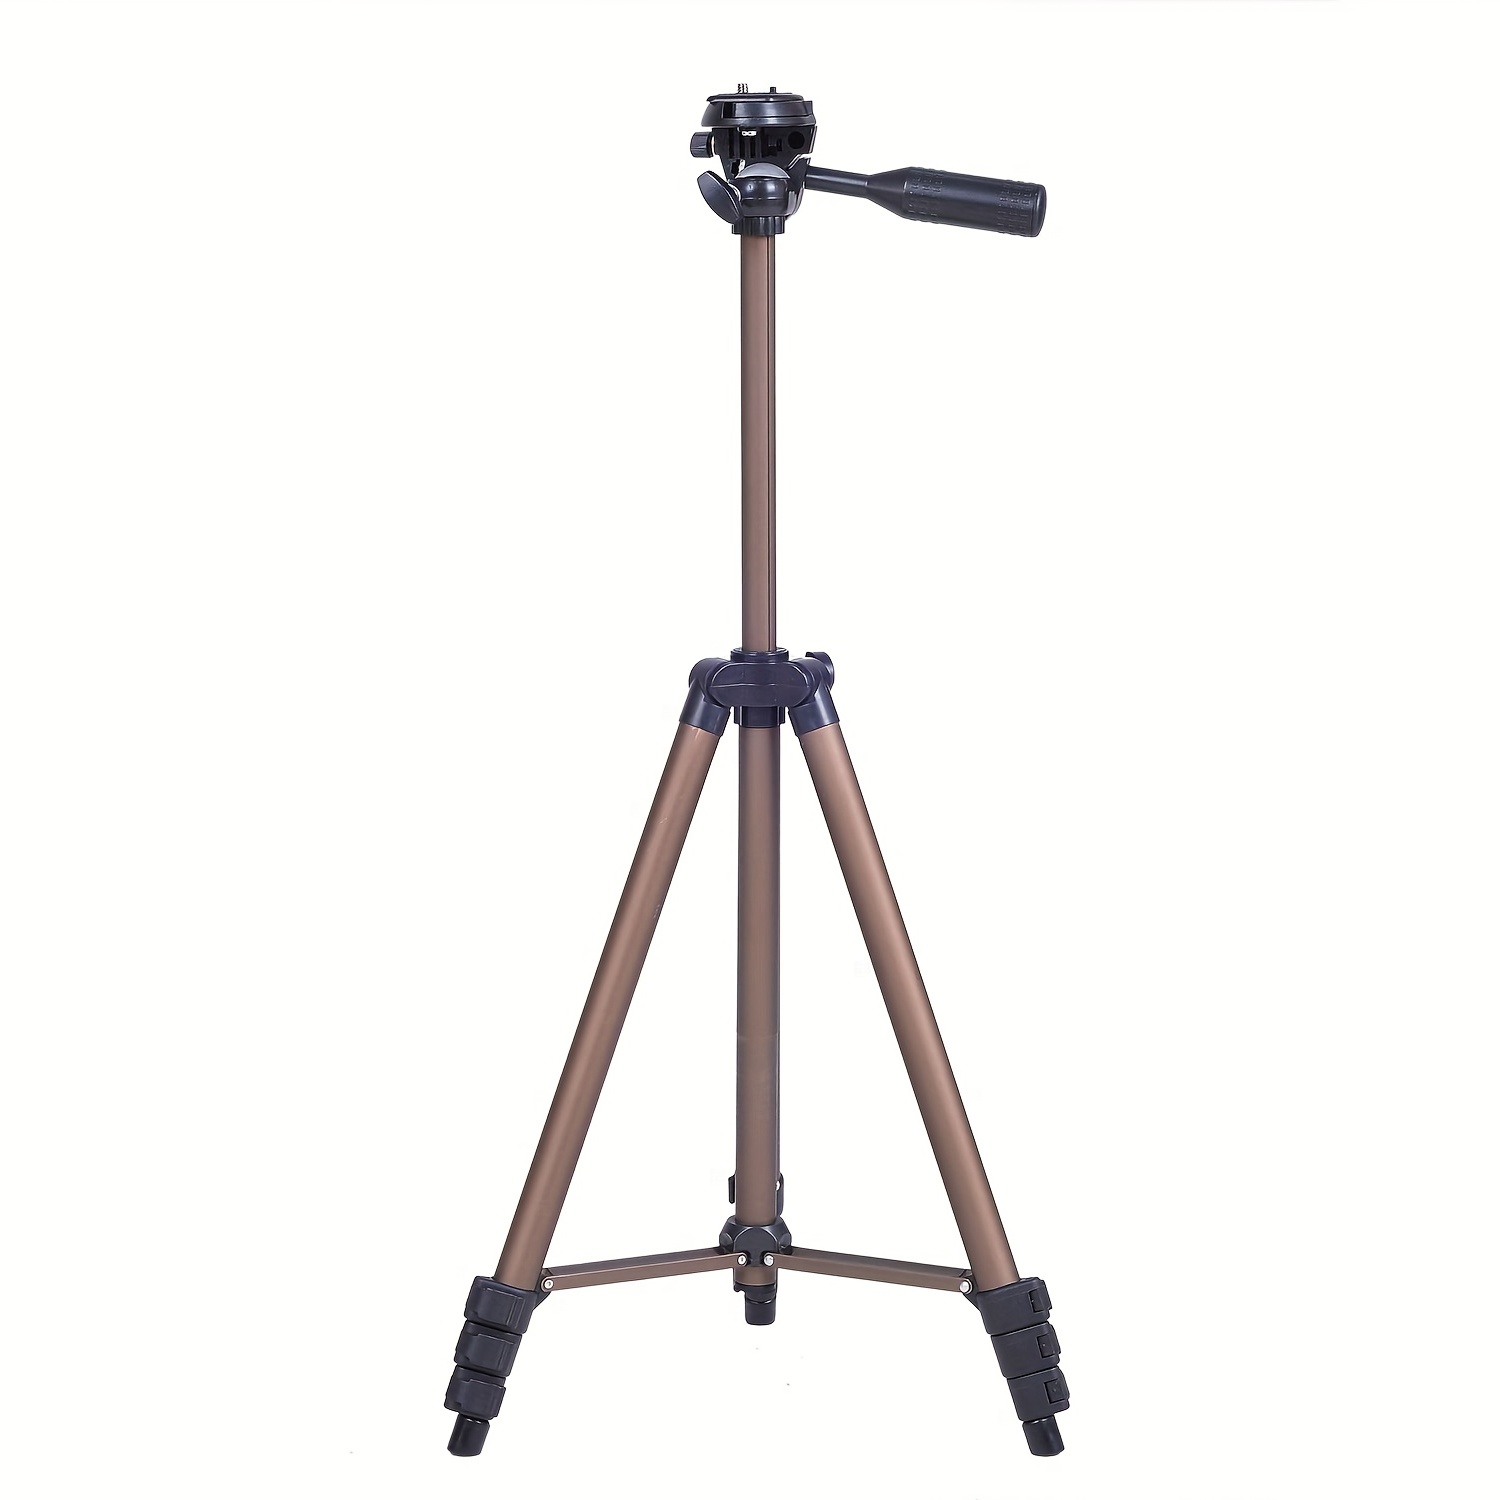 MEEDEN Tripod Field Painting Easel with Carrying Case - Solid Beech Wood  Outdoor Tripod Easel Portable Painting Artist Easel - AliExpress